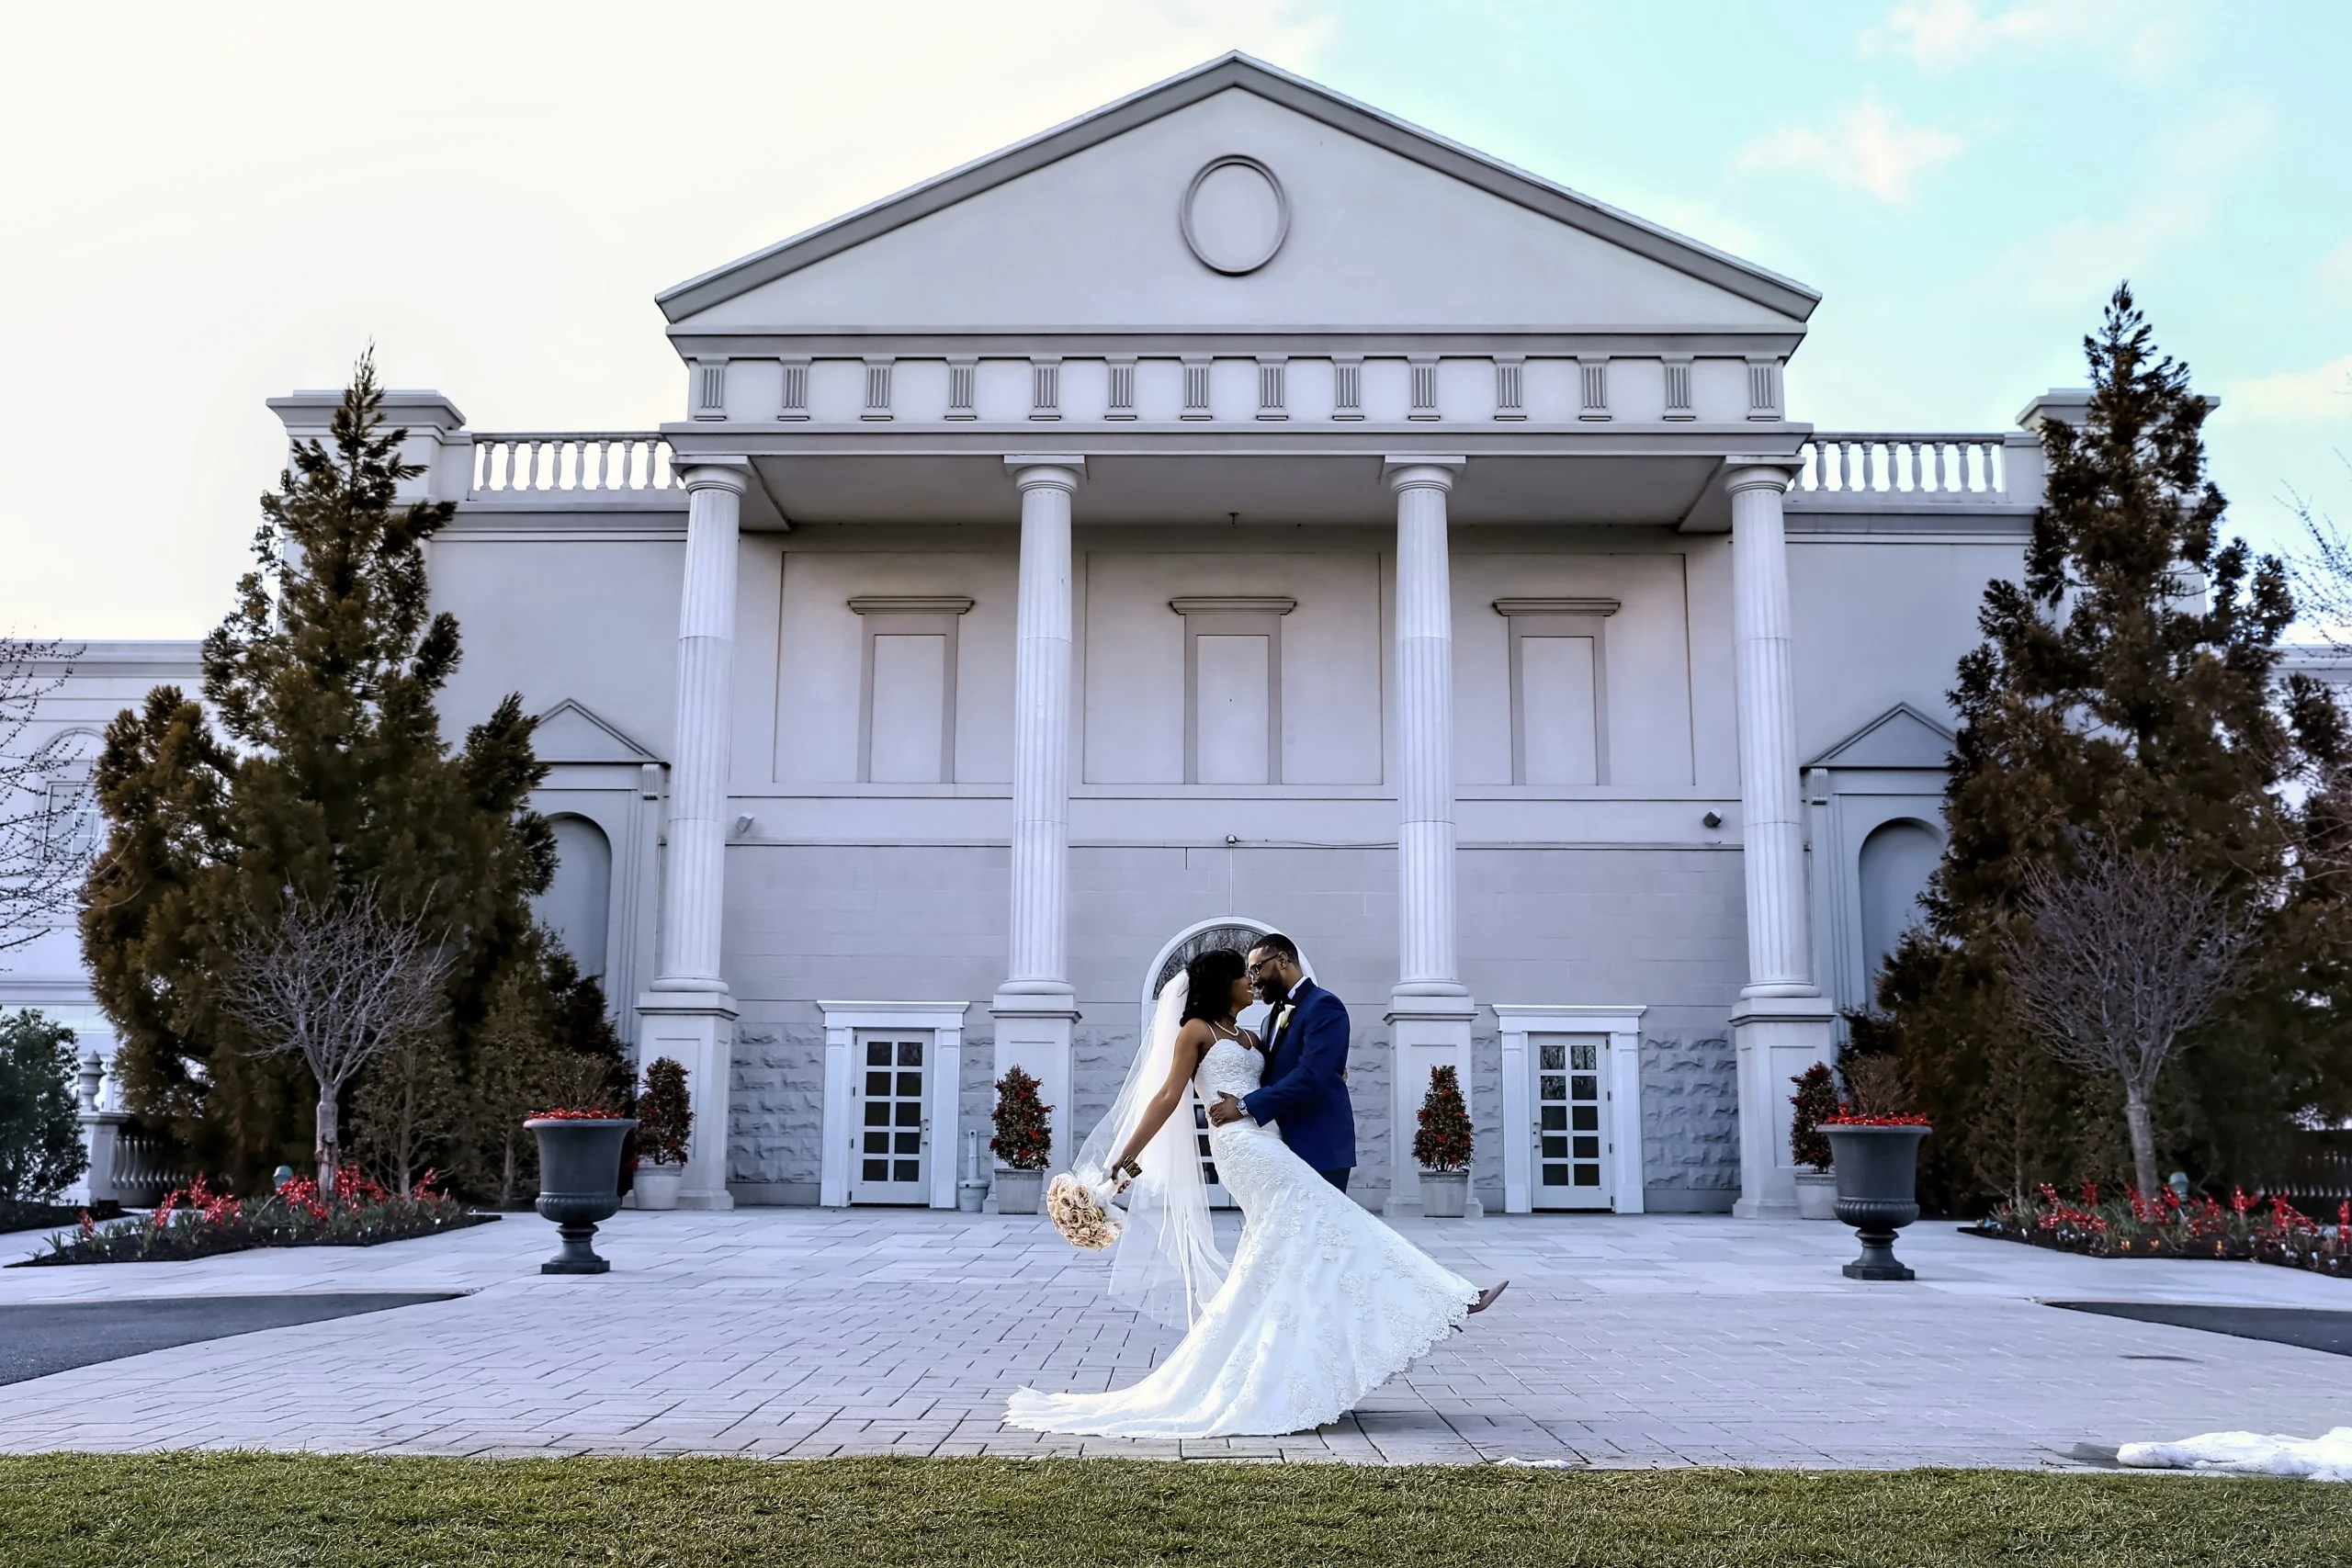 A bride and groom standing in front of a large white building.